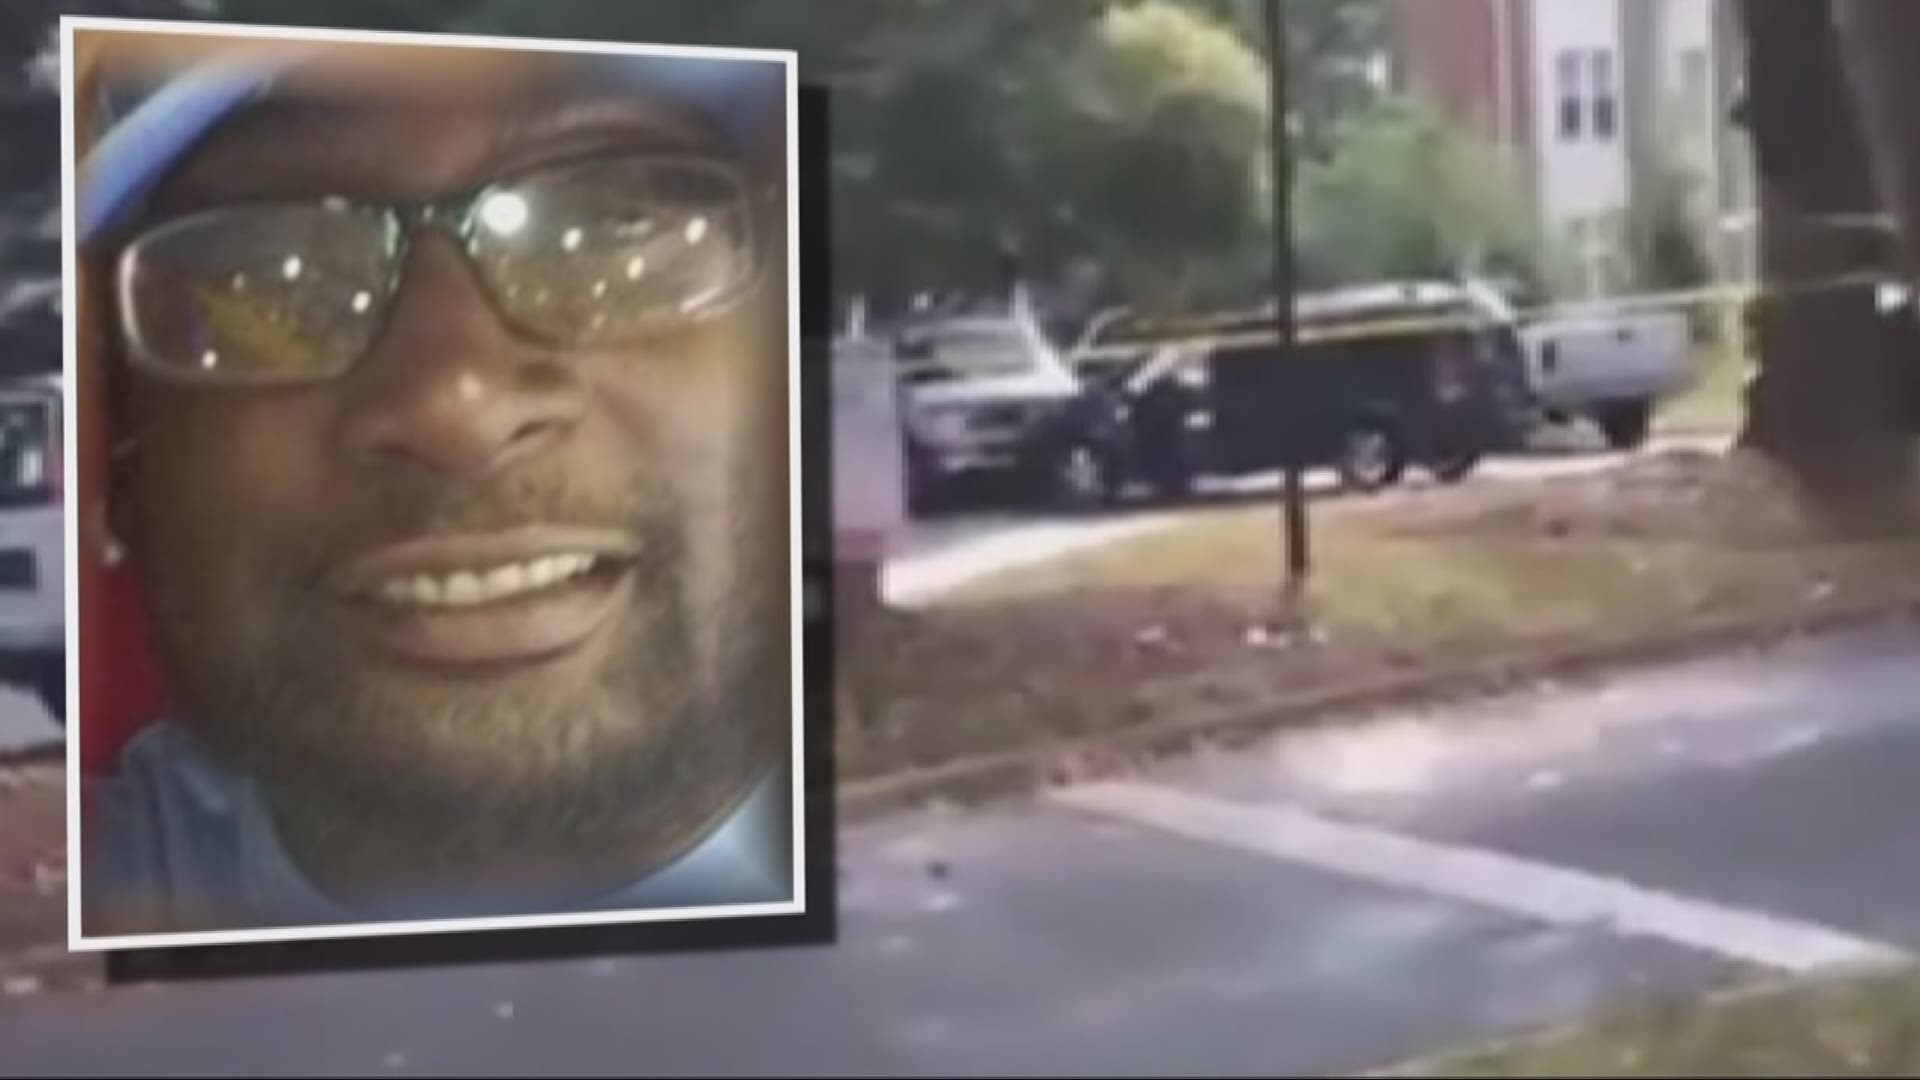 The head of Internal Affairs for Charlotte-Mecklenburg Police is defending the findings on an investigation that concluded a CMPD officer was justified when he shot and killed Keith Scott last fall.